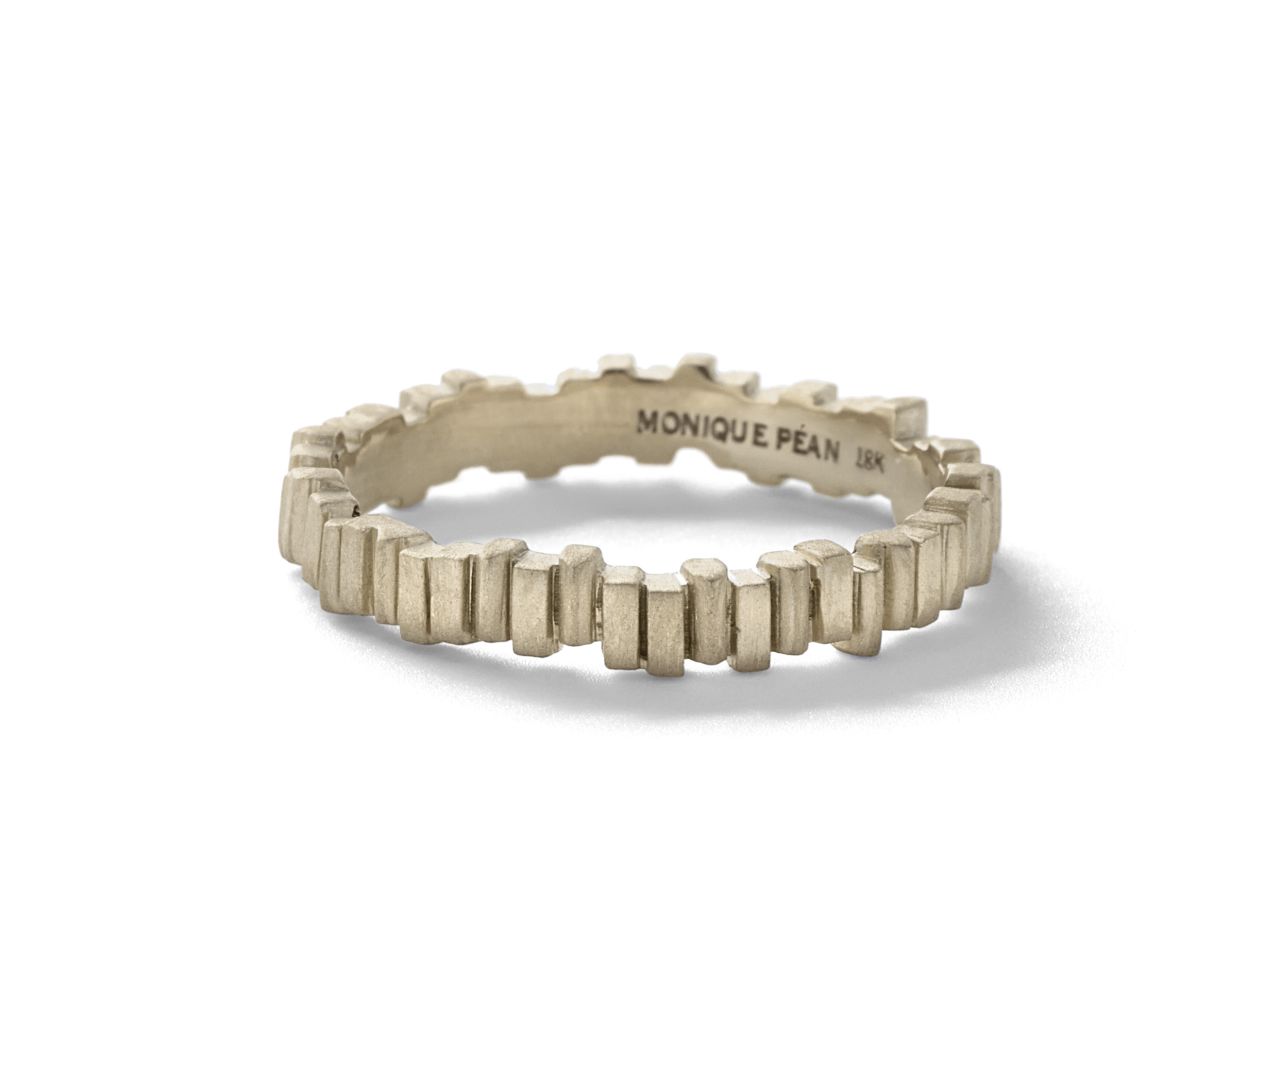 "I would recommend my Norske band as a minimalist engagement ring for men with an appreciation of art and architecture. The design of this ring pays homage to Norwegian construction, and highlights my interest in the graceful juxtaposition of negative space, structure and form. The texture of this ring was specifically influenced by the Oslo Opera House's undulating wall." -- <a href="http://moniquepean.com/" target="_blank" target="_blank">Monique Péan</a>, Designer <br />